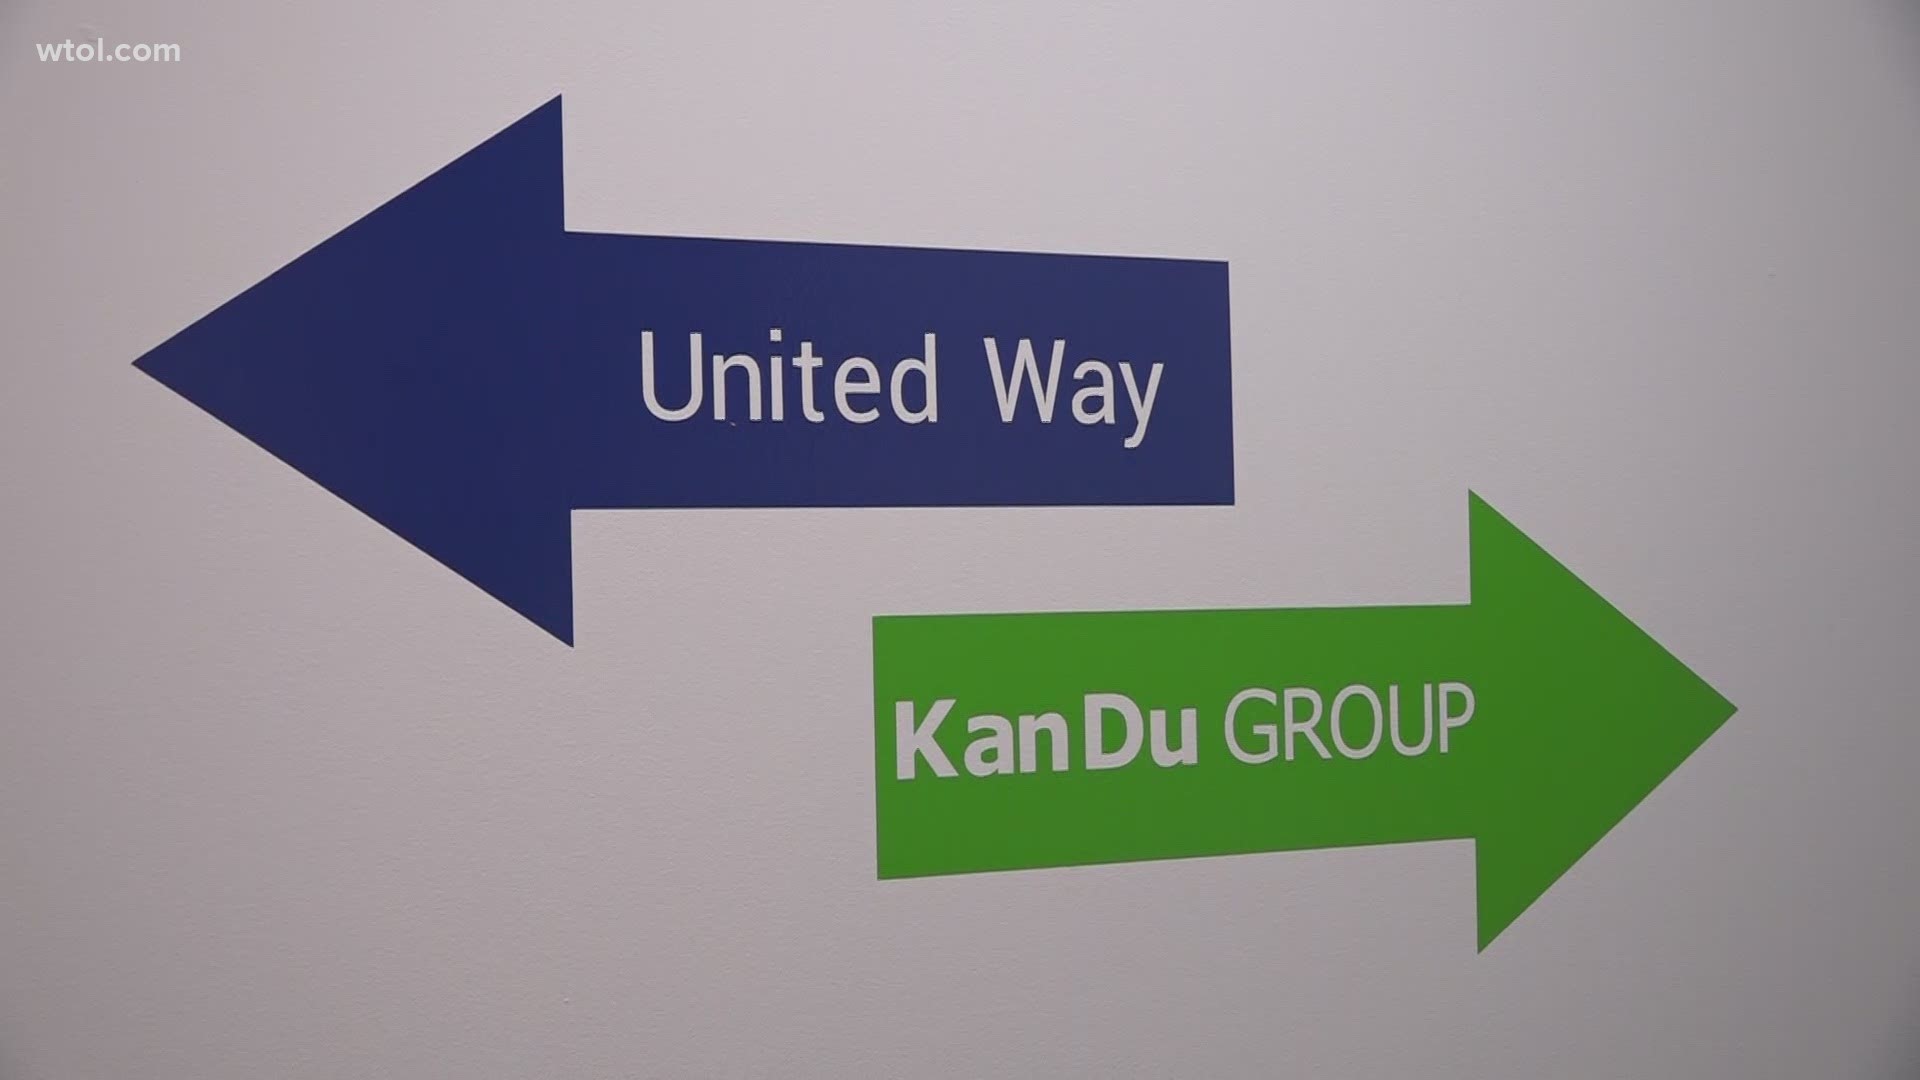 The new location is on the second floor of the Kan Du Studio building on West Main Cross.